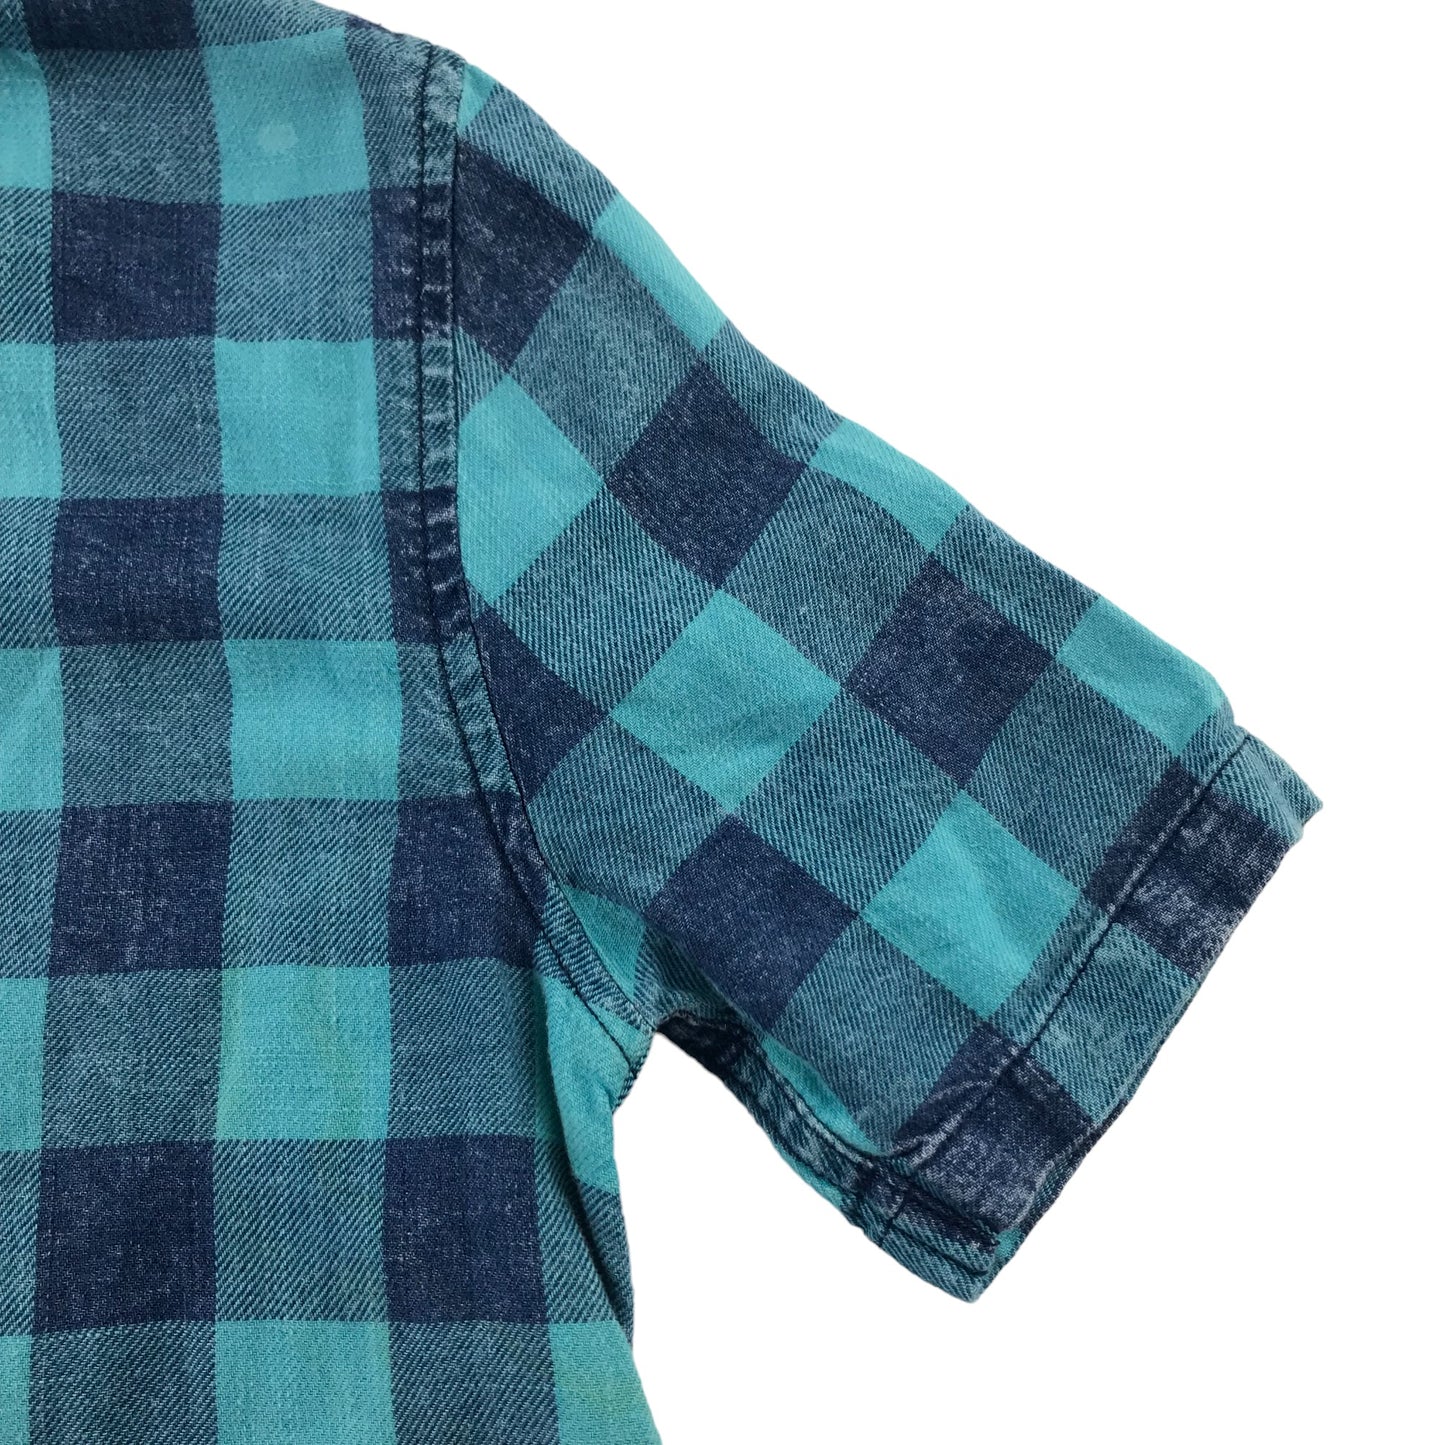 Next Shirt Age 8 Blue and Navy Checked Short Sleeve Button Up Cotton